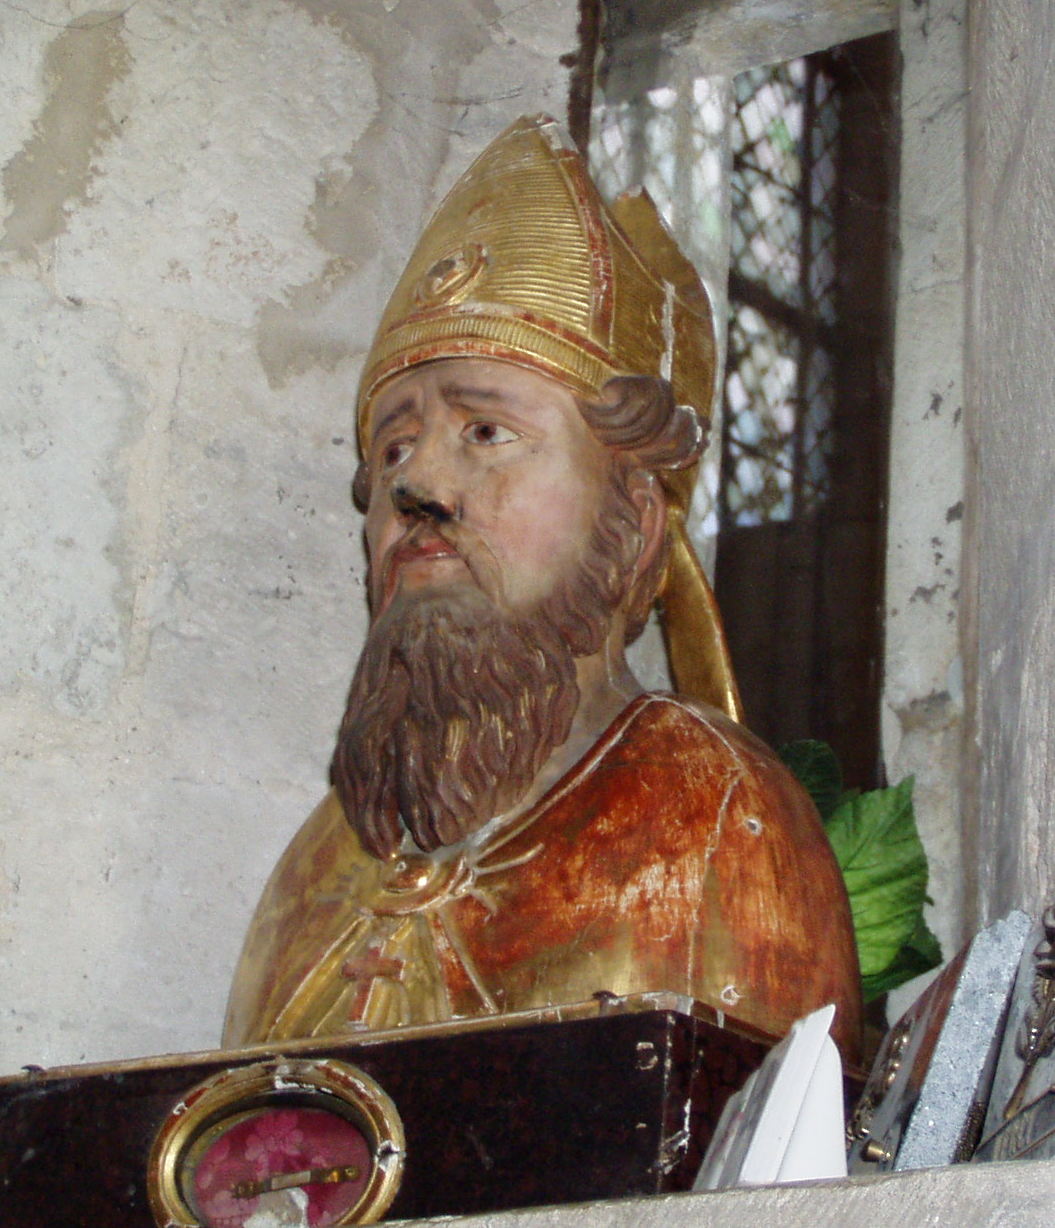 Sulpitius the Pious, French bishop and saint died on January 17, 644.